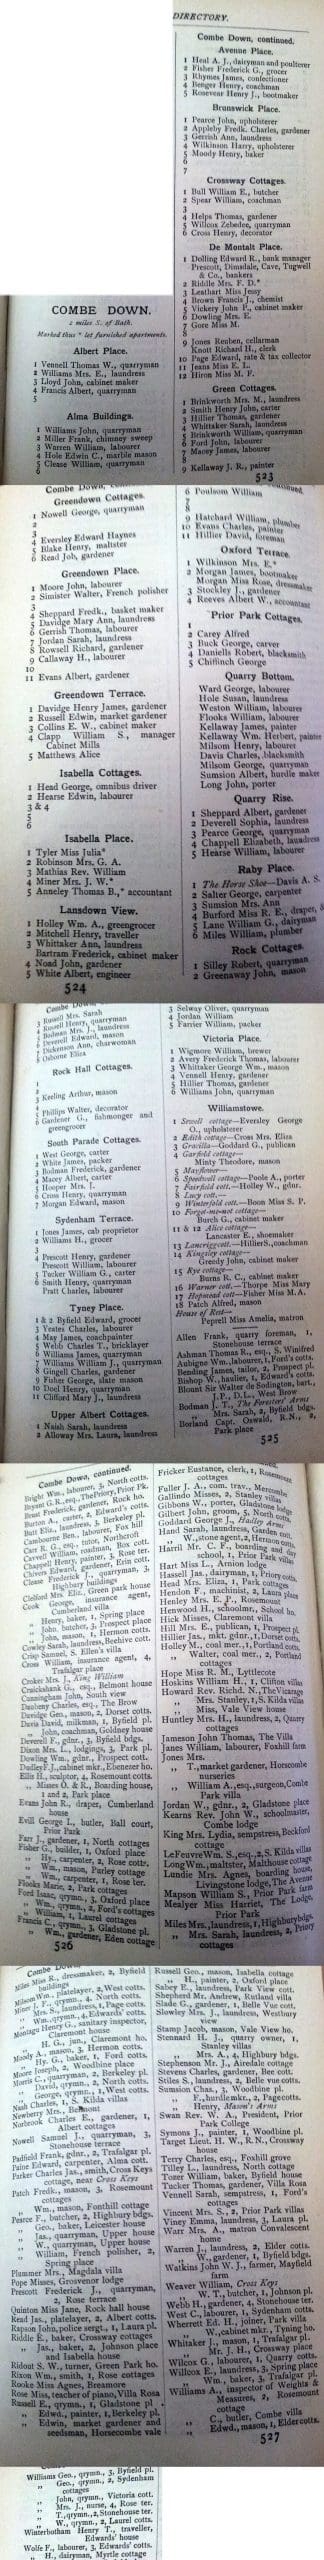 1896 Post Office Directory for Combe Down